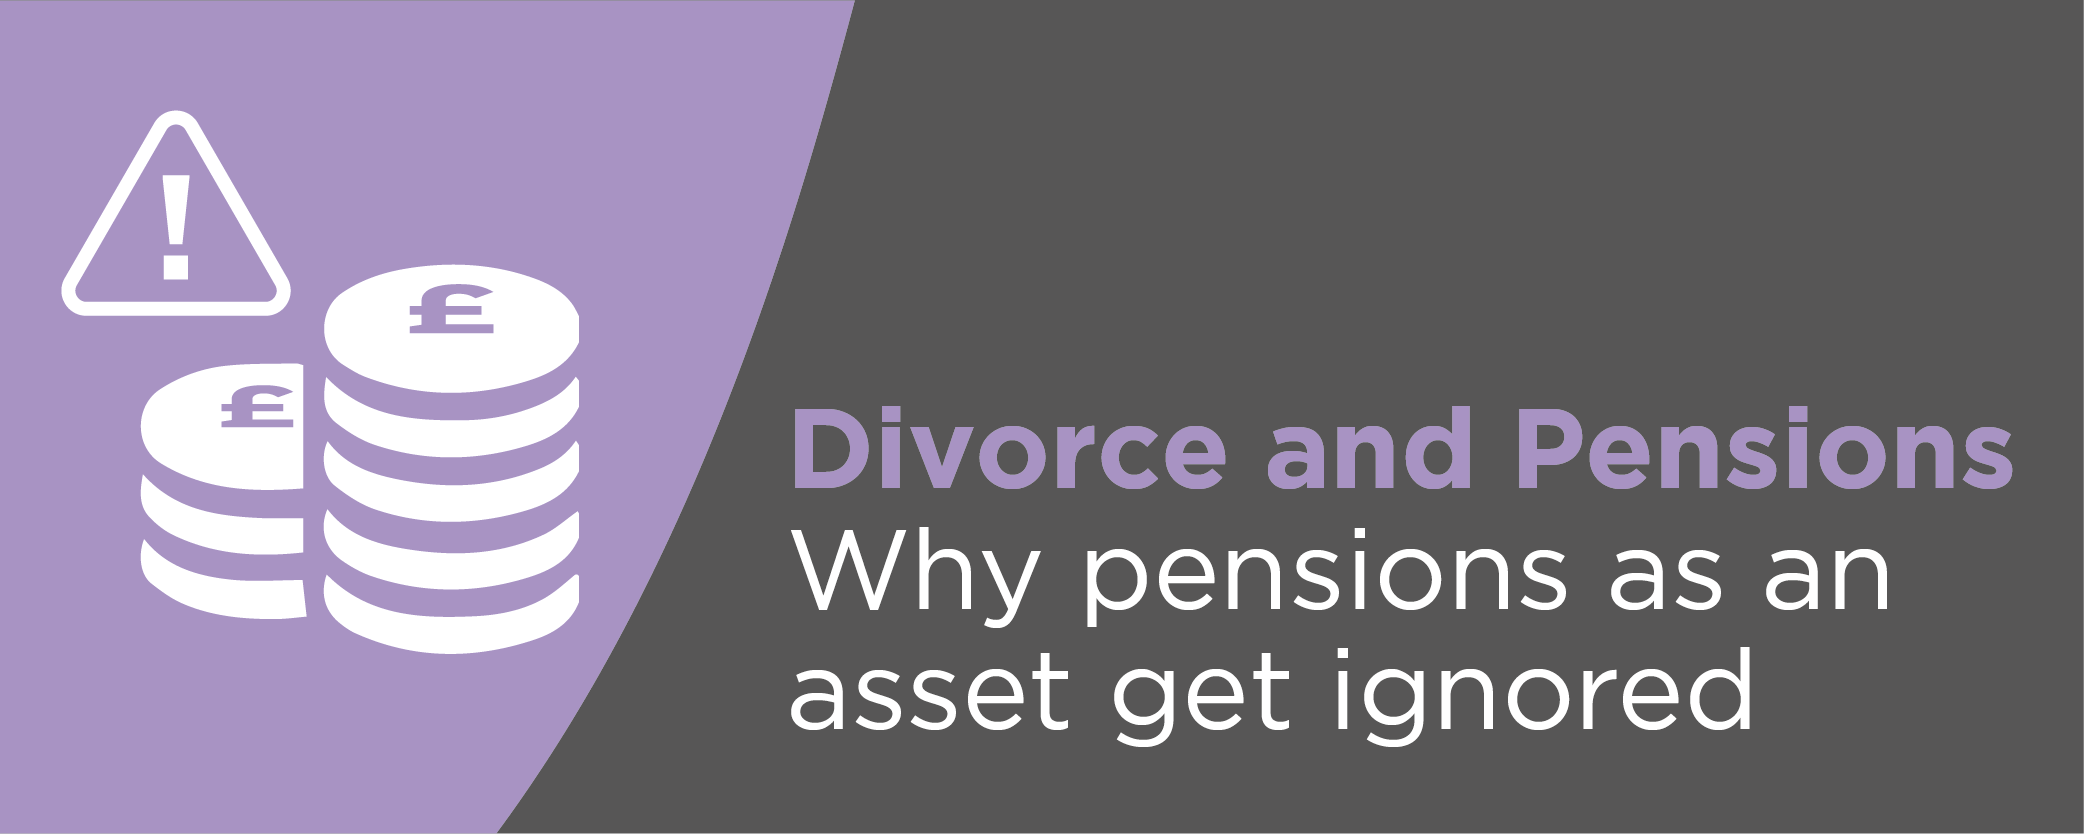 Divorce and Pensions: Why pensions as an asset get ignored